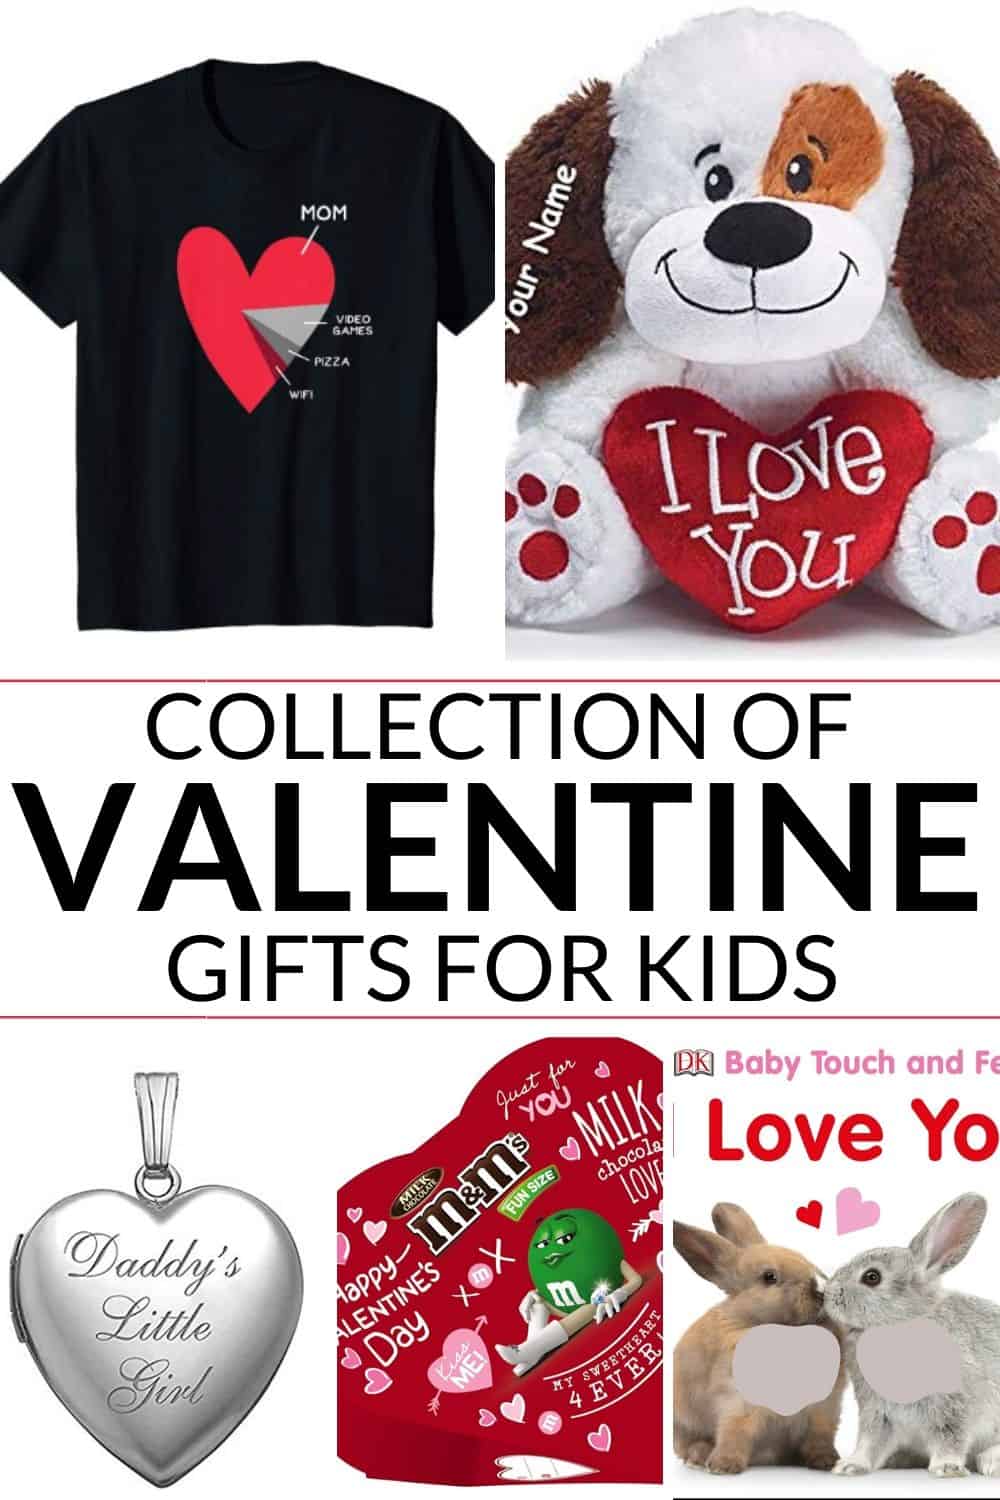 Collection of valentines gifts for kids